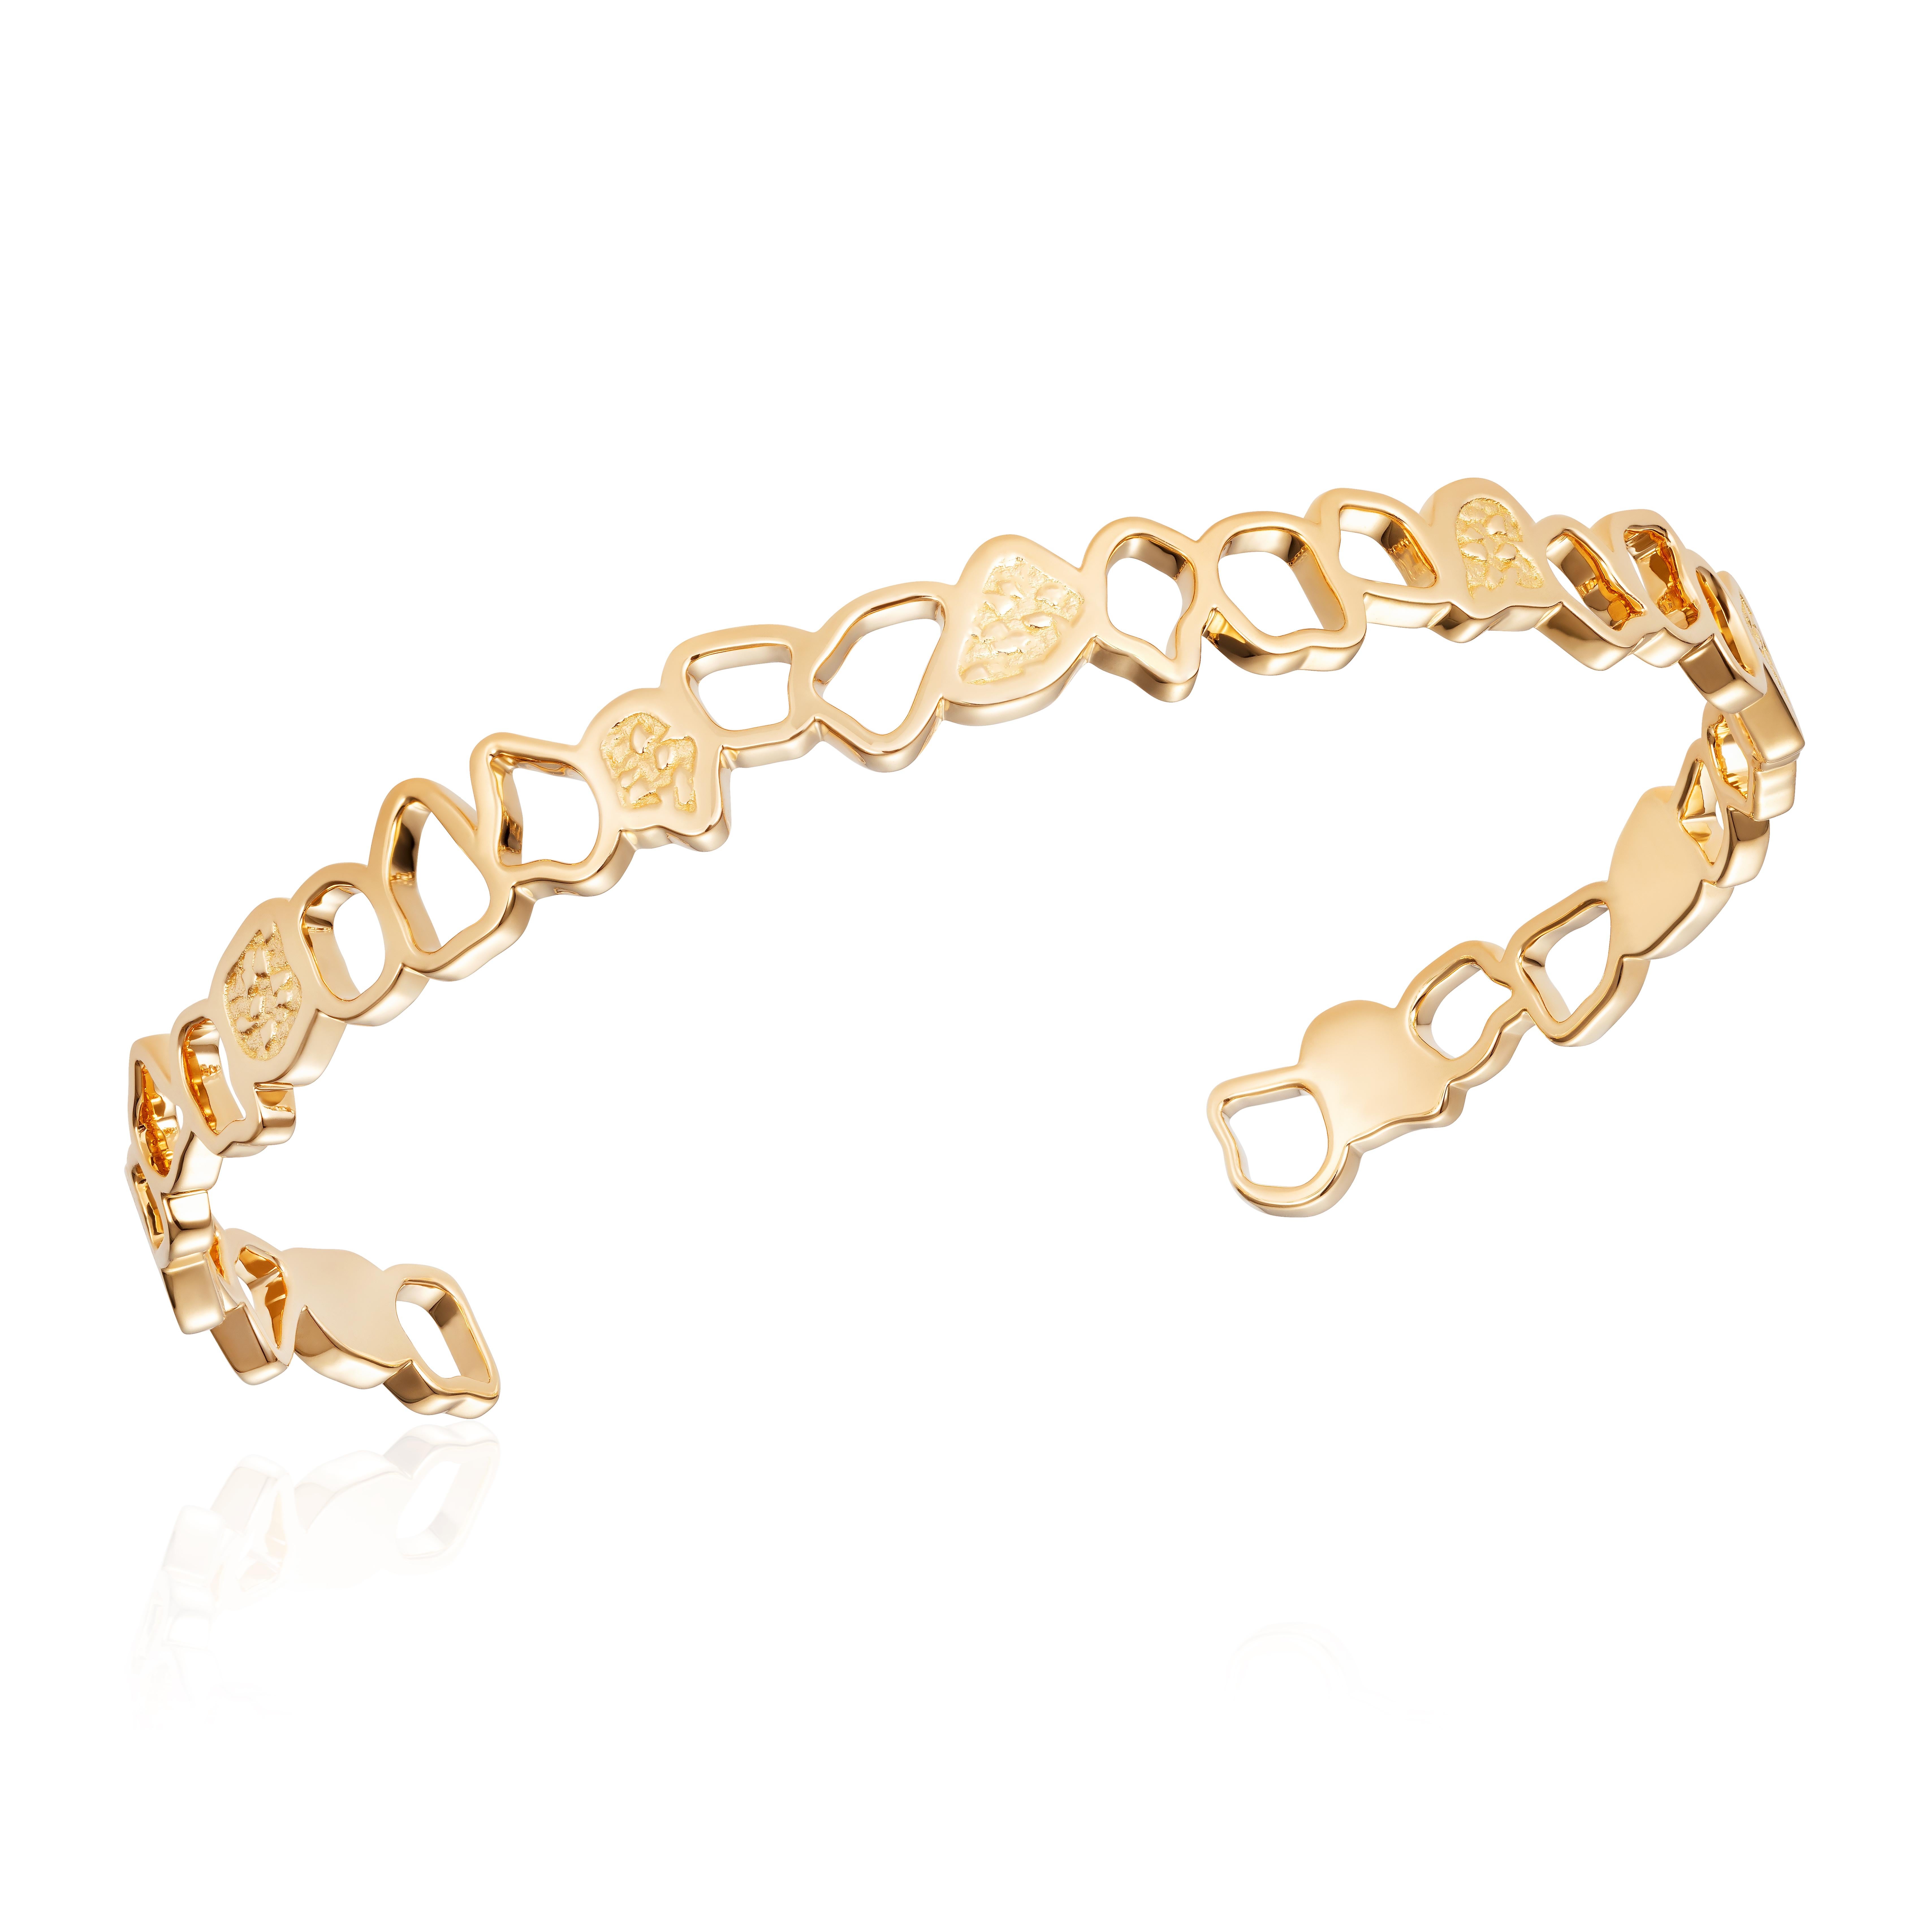 18 Karat Yellow Gold Cuff Bracelet

This eye-catching yellow gold cuff is perfect for everyday wear and will no doubt attract attention. Part of the Twiga collection, it features intricate detail resembling the giraffe's spots and has an average